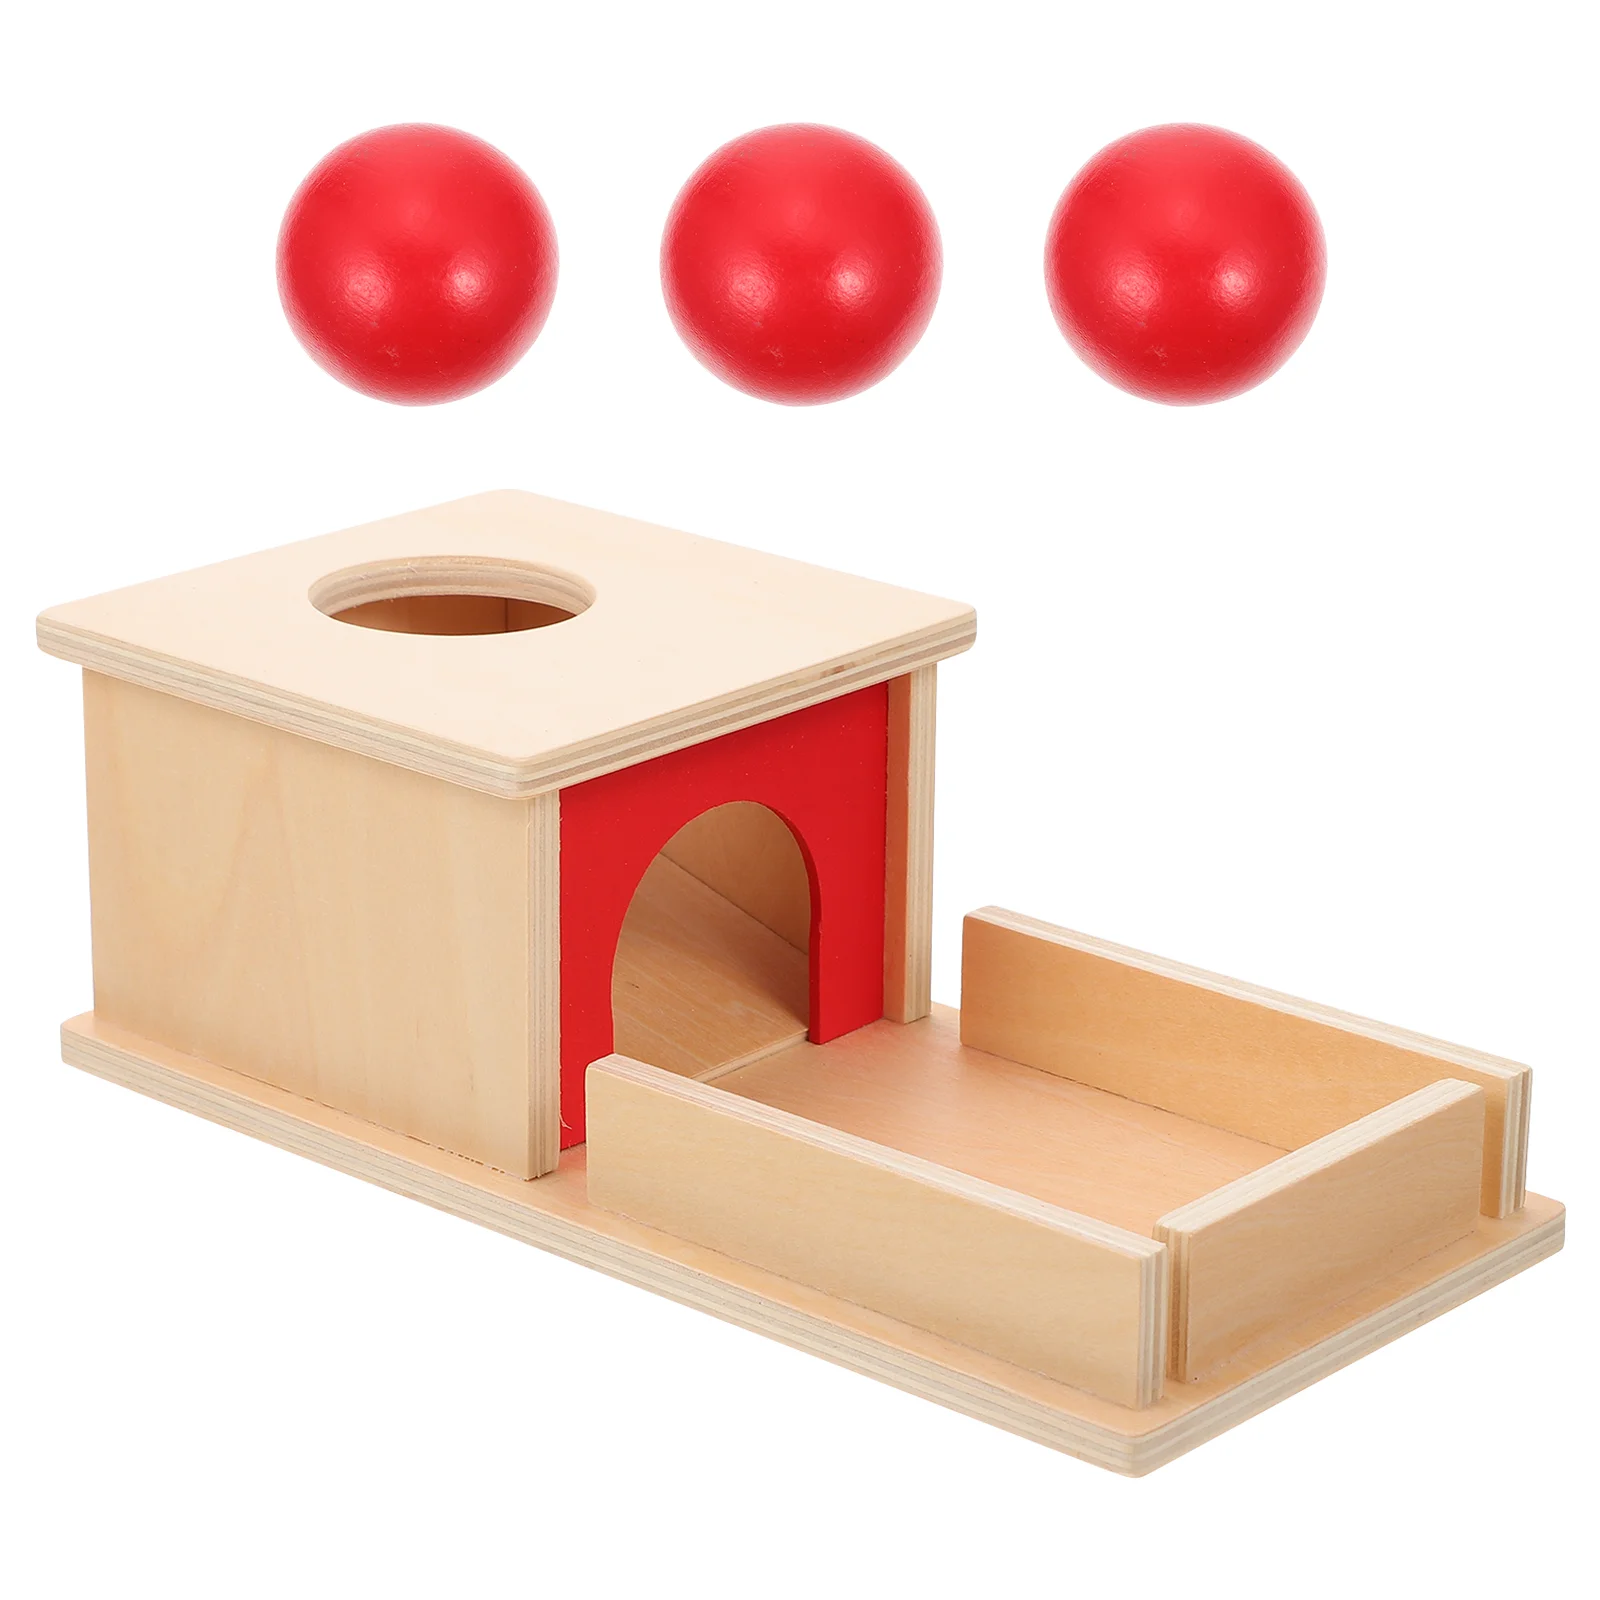 

Box Target Montessori S Ball Woodeneducational For Drop 6 Baby Months Plaything Babies Kids Old Interactive Parent